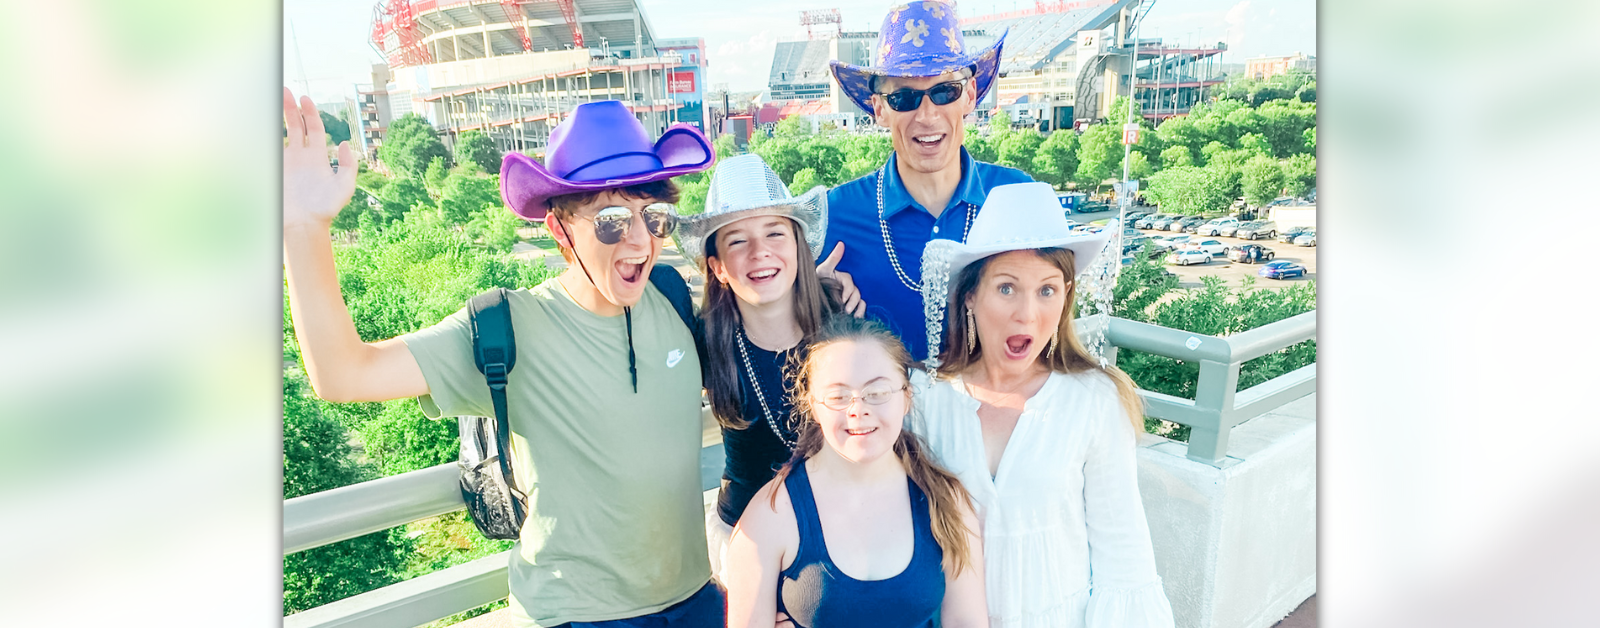 Amy Julia and family make silly faces on a bridge in Nashville before the Beyonce concert